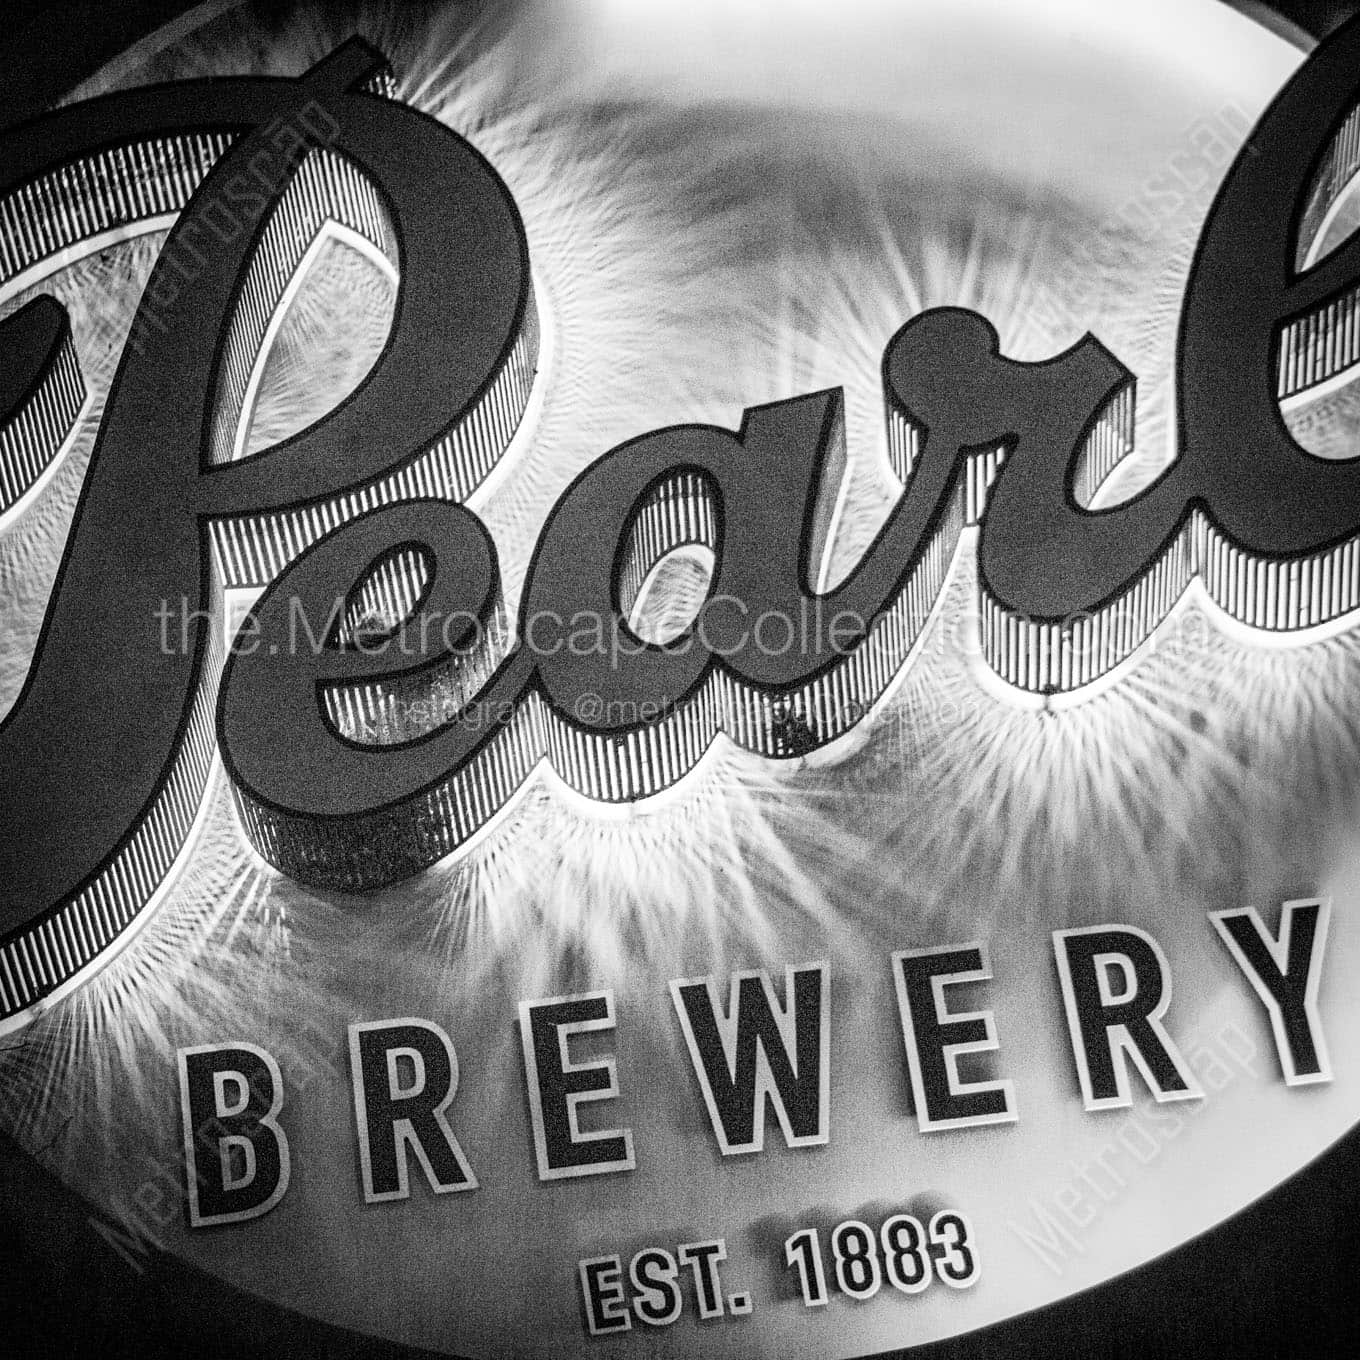 pearl brewery sign Black & White Office Art